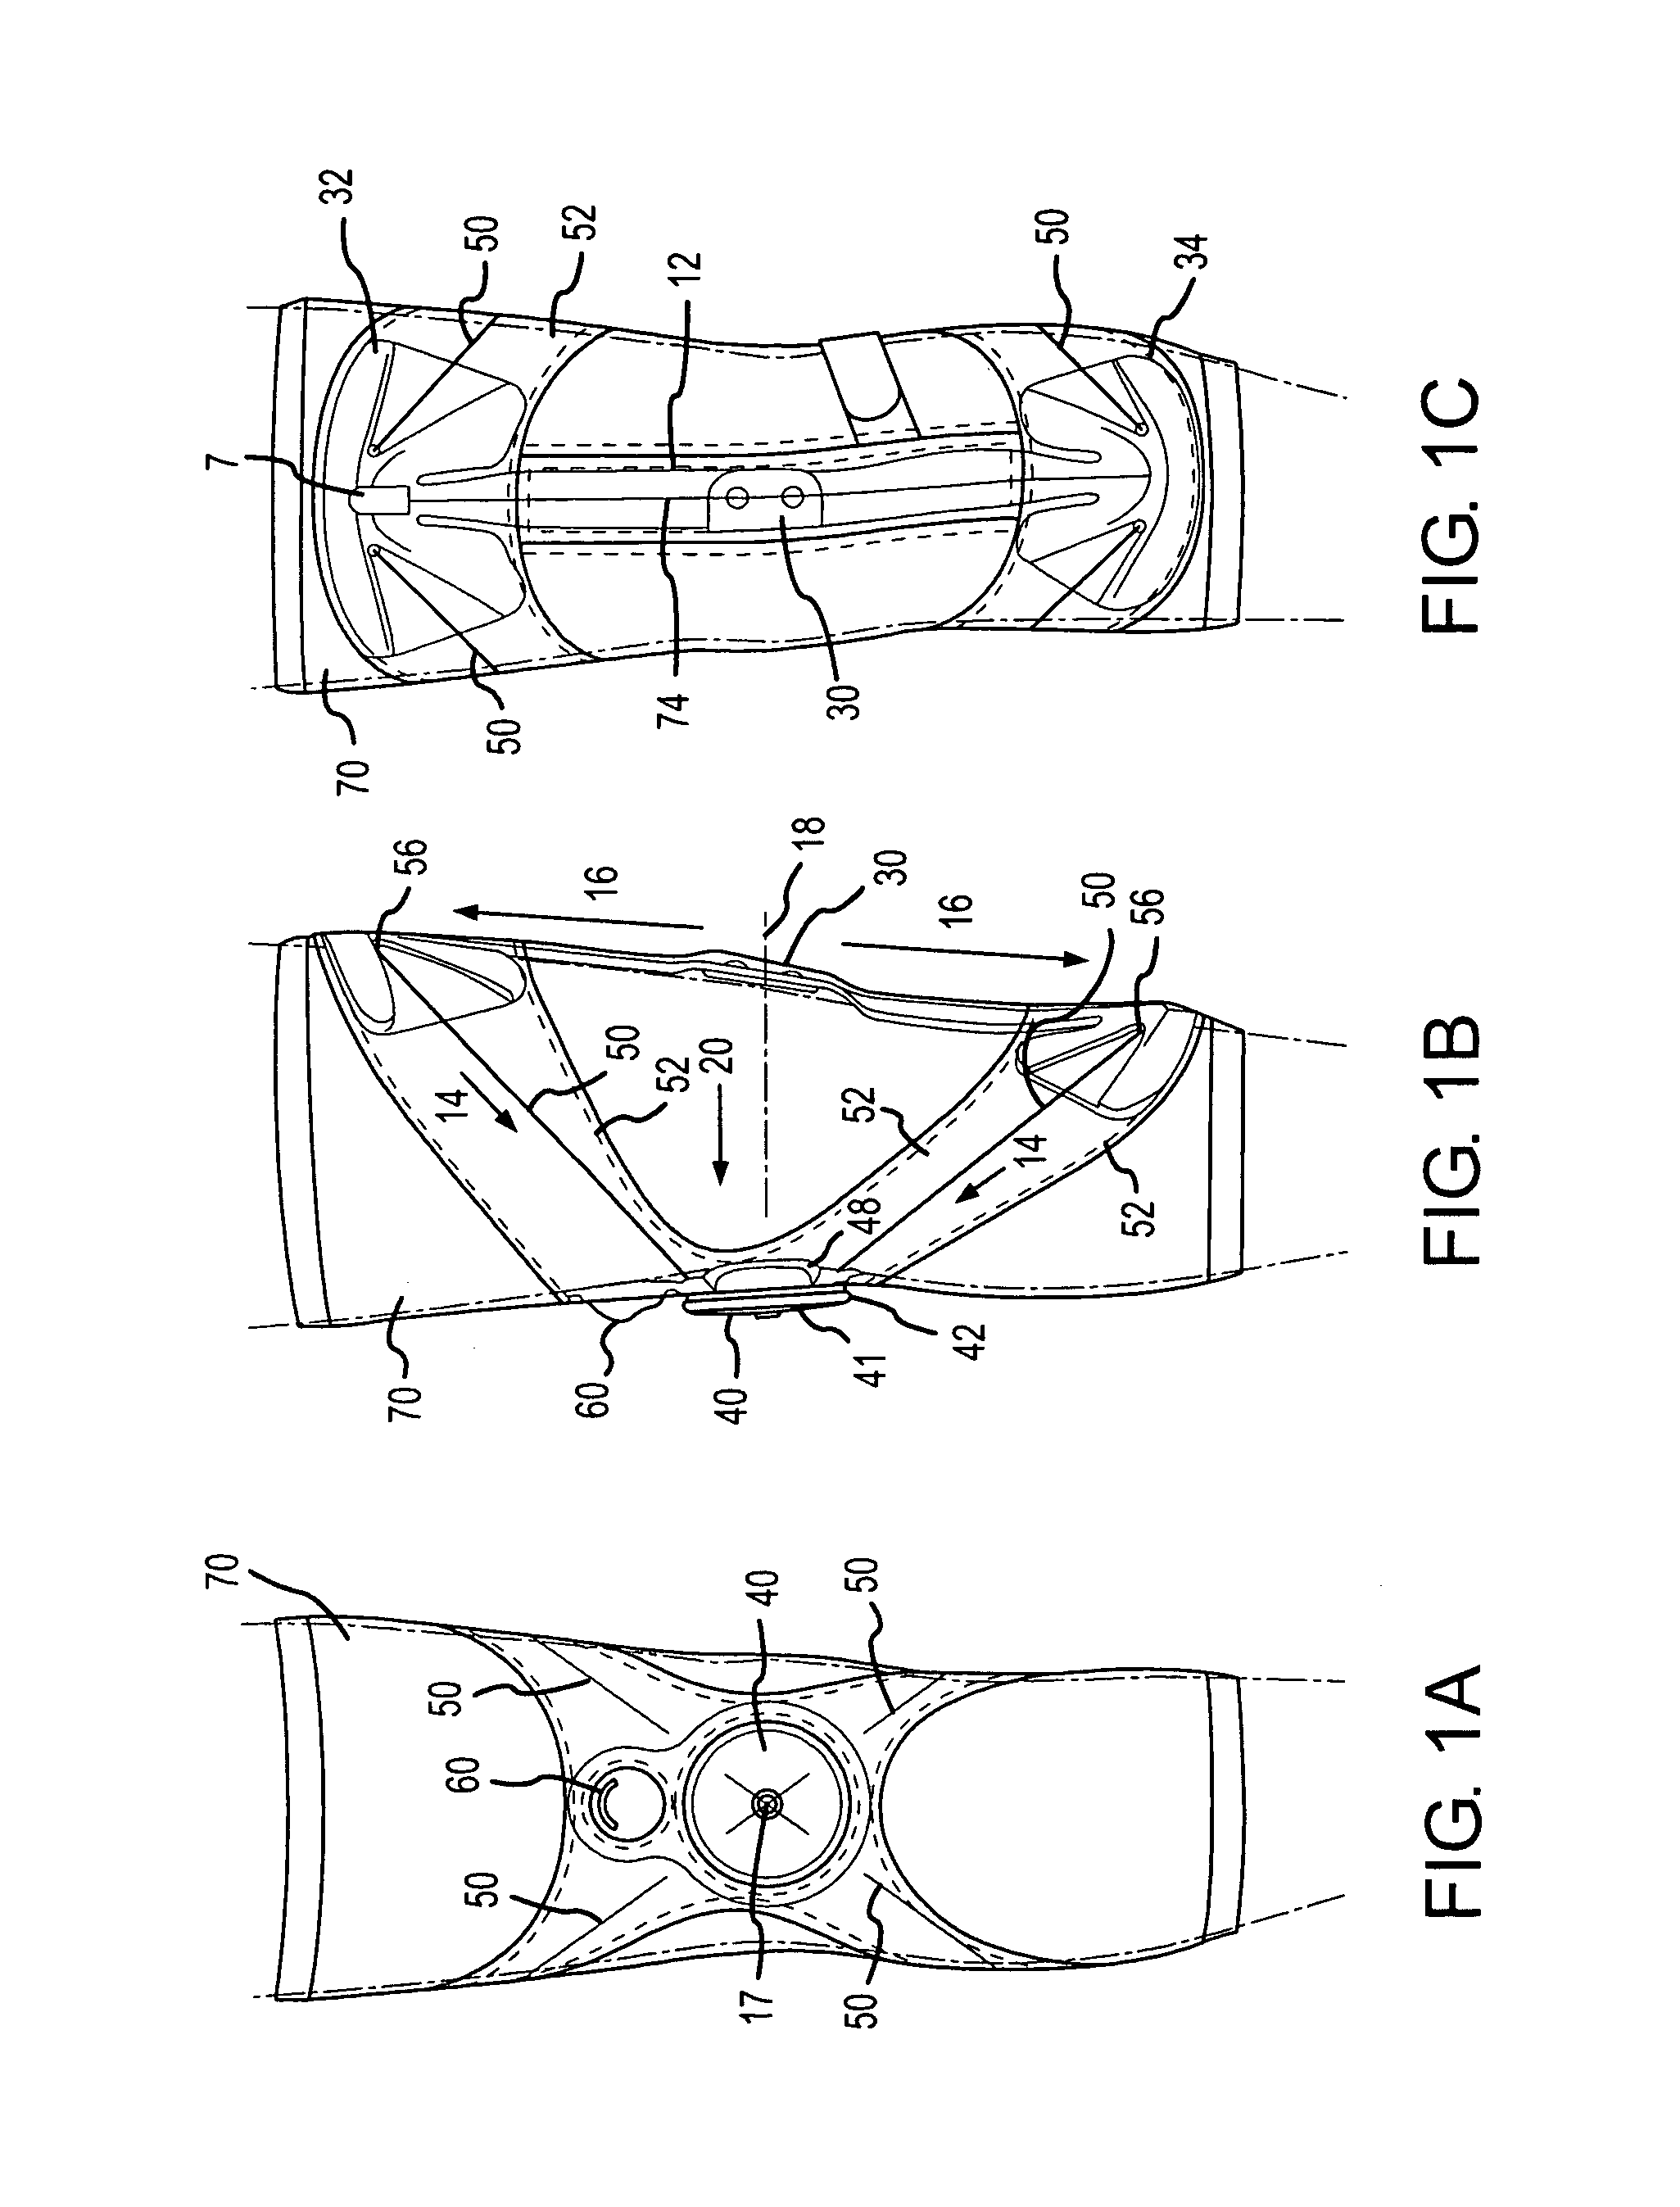 Orthotic or prosthetic devices with adjustable force dosimeter and sensor